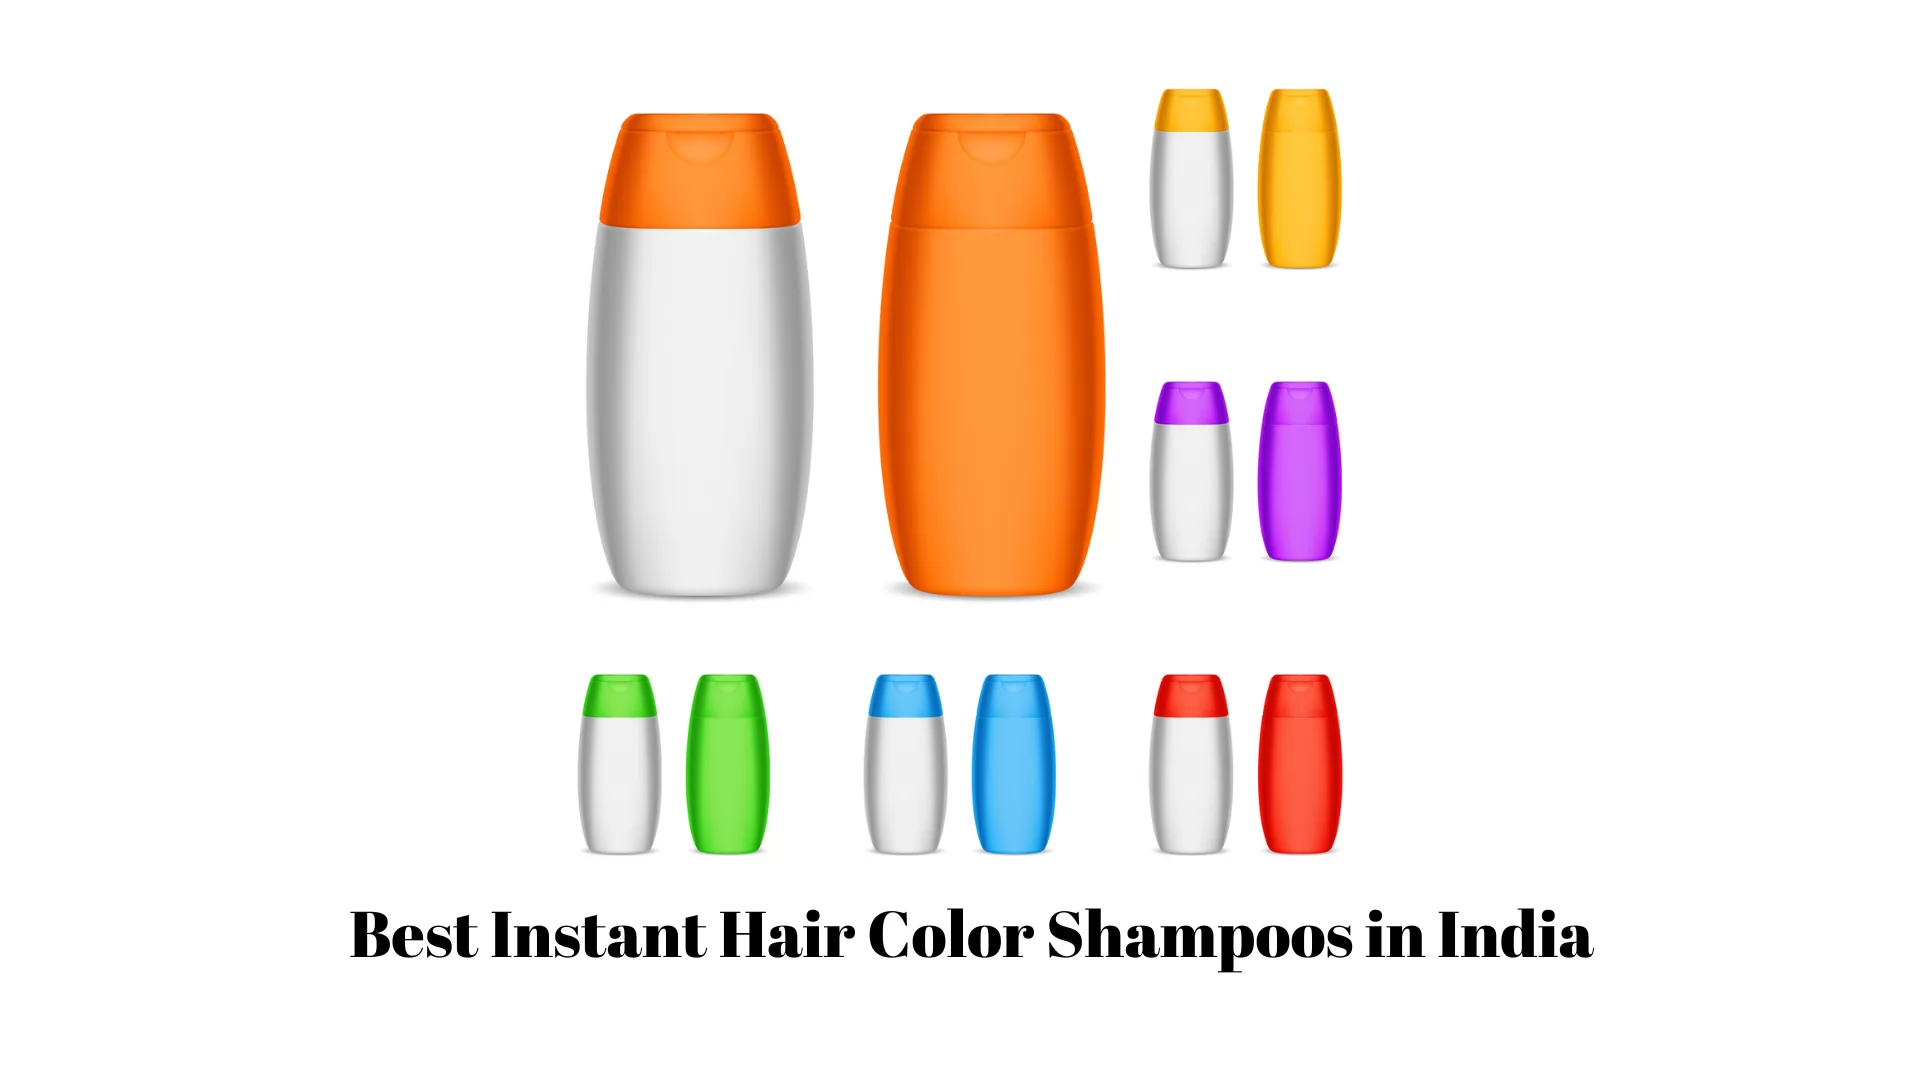 Best Instant Hair Color Shampoos in India